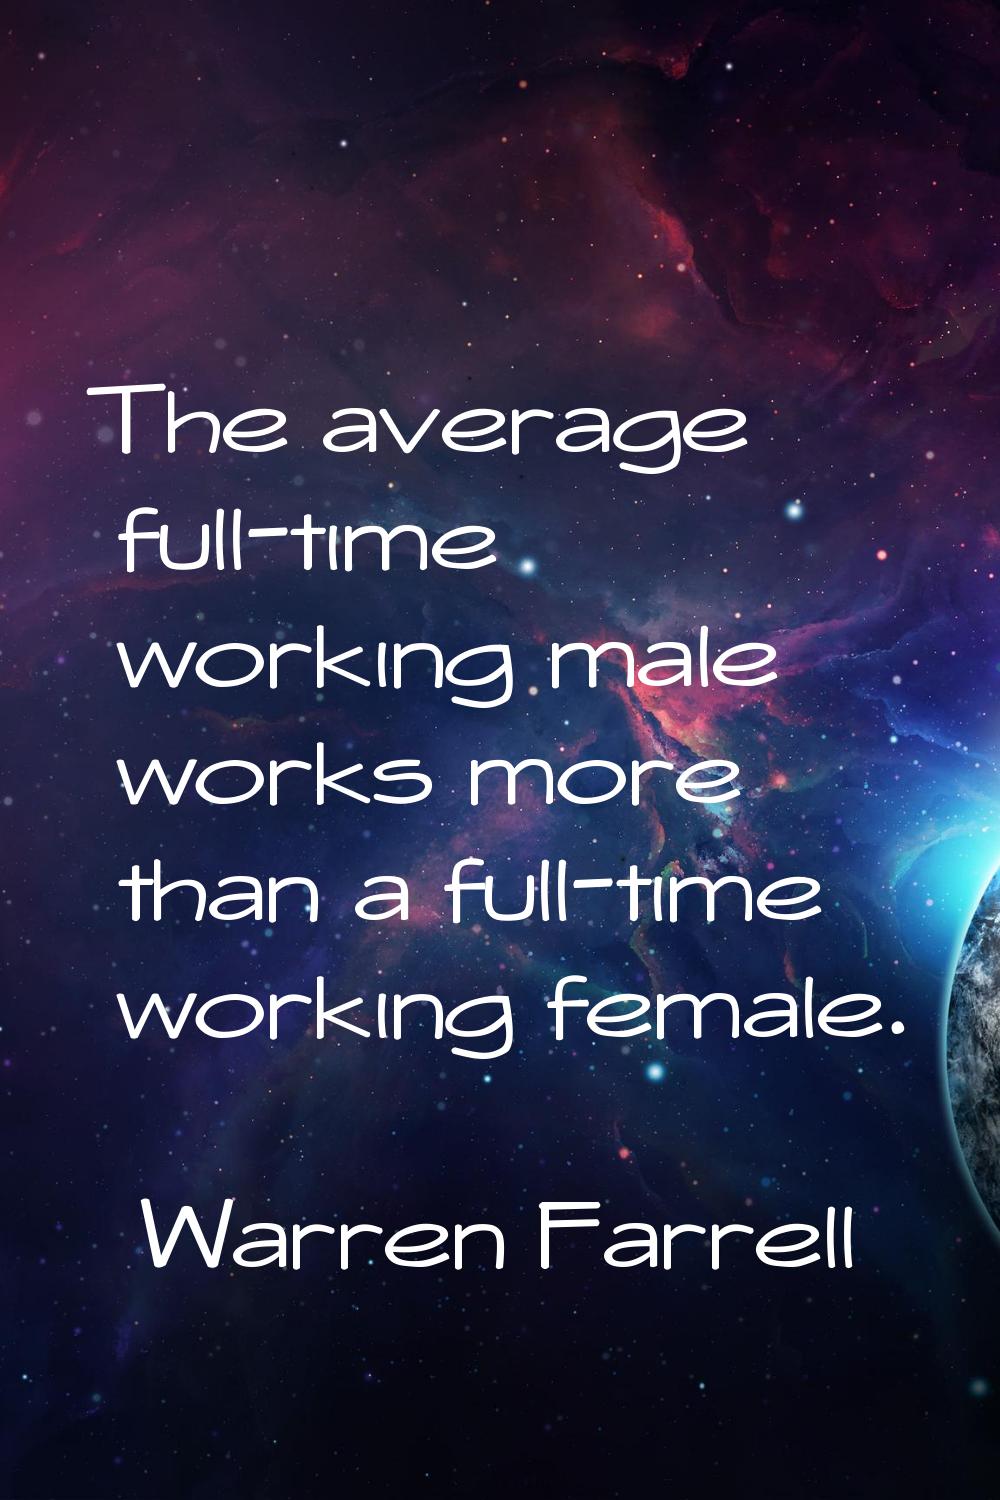 The average full-time working male works more than a full-time working female.